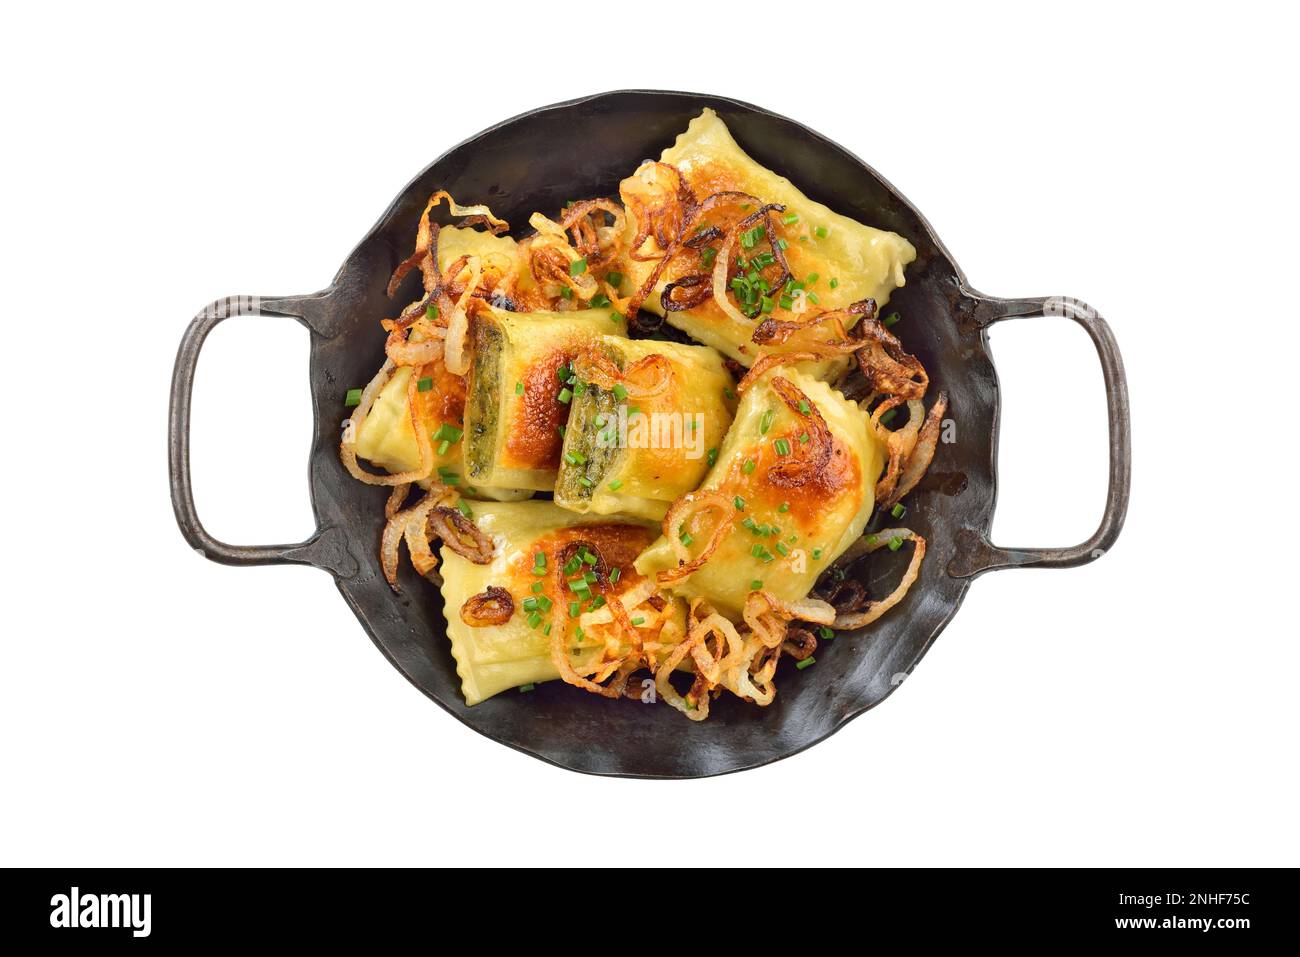 Fried Swabian meat ravioli (so called Maultaschen) with roasted onions, served in an iron frying pan on white background Stock Photo